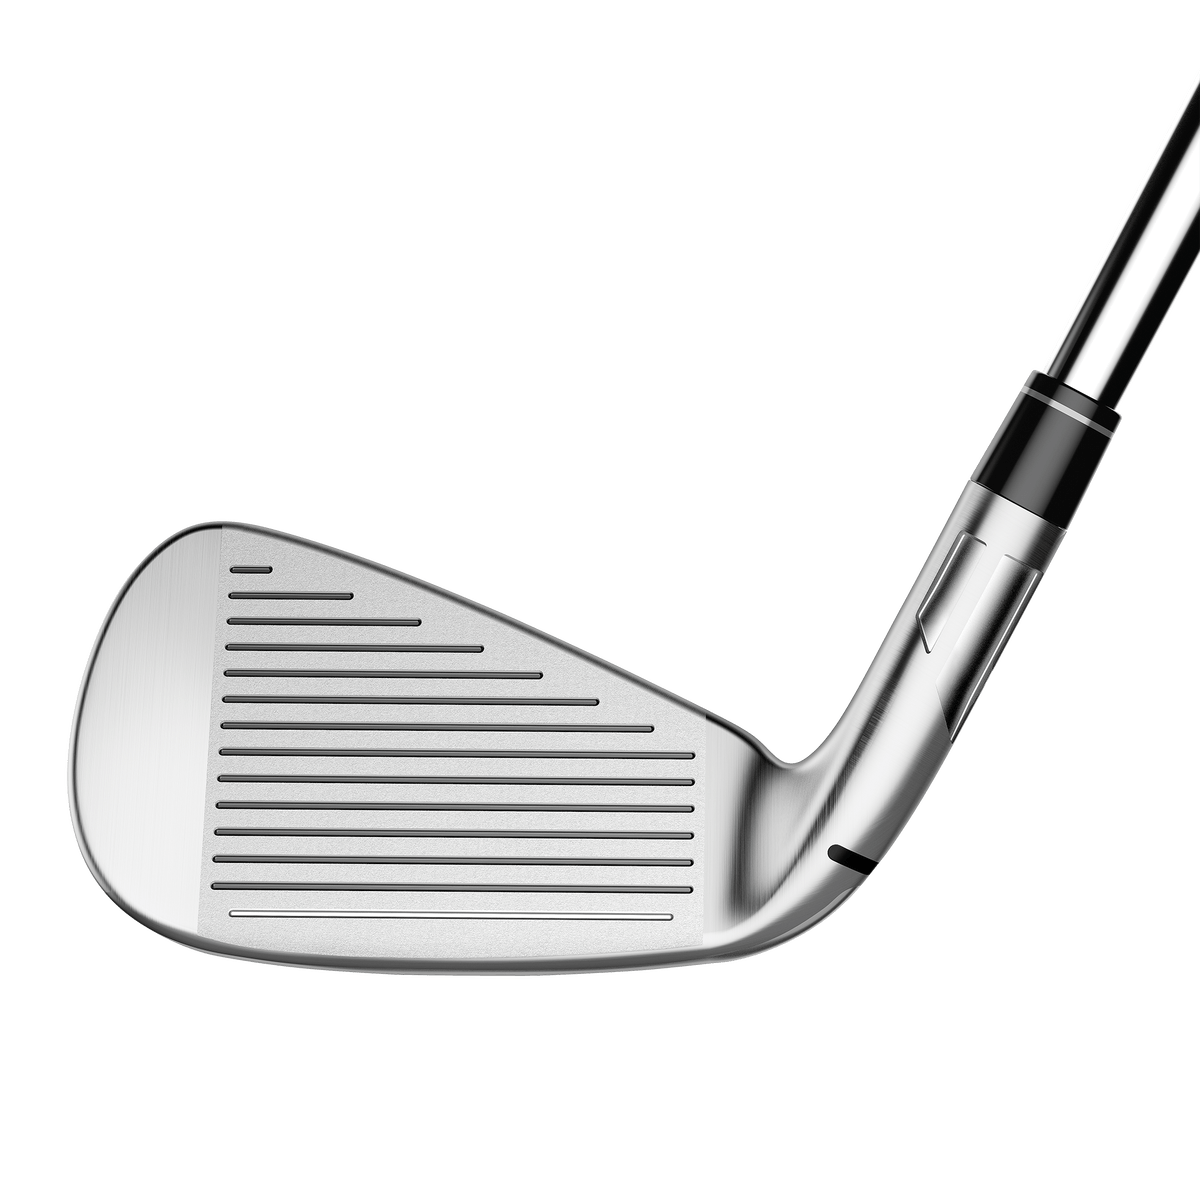 TaylorMade SIM2 Max Irons · Right handed · Steel · Regular · 4-PW,AW